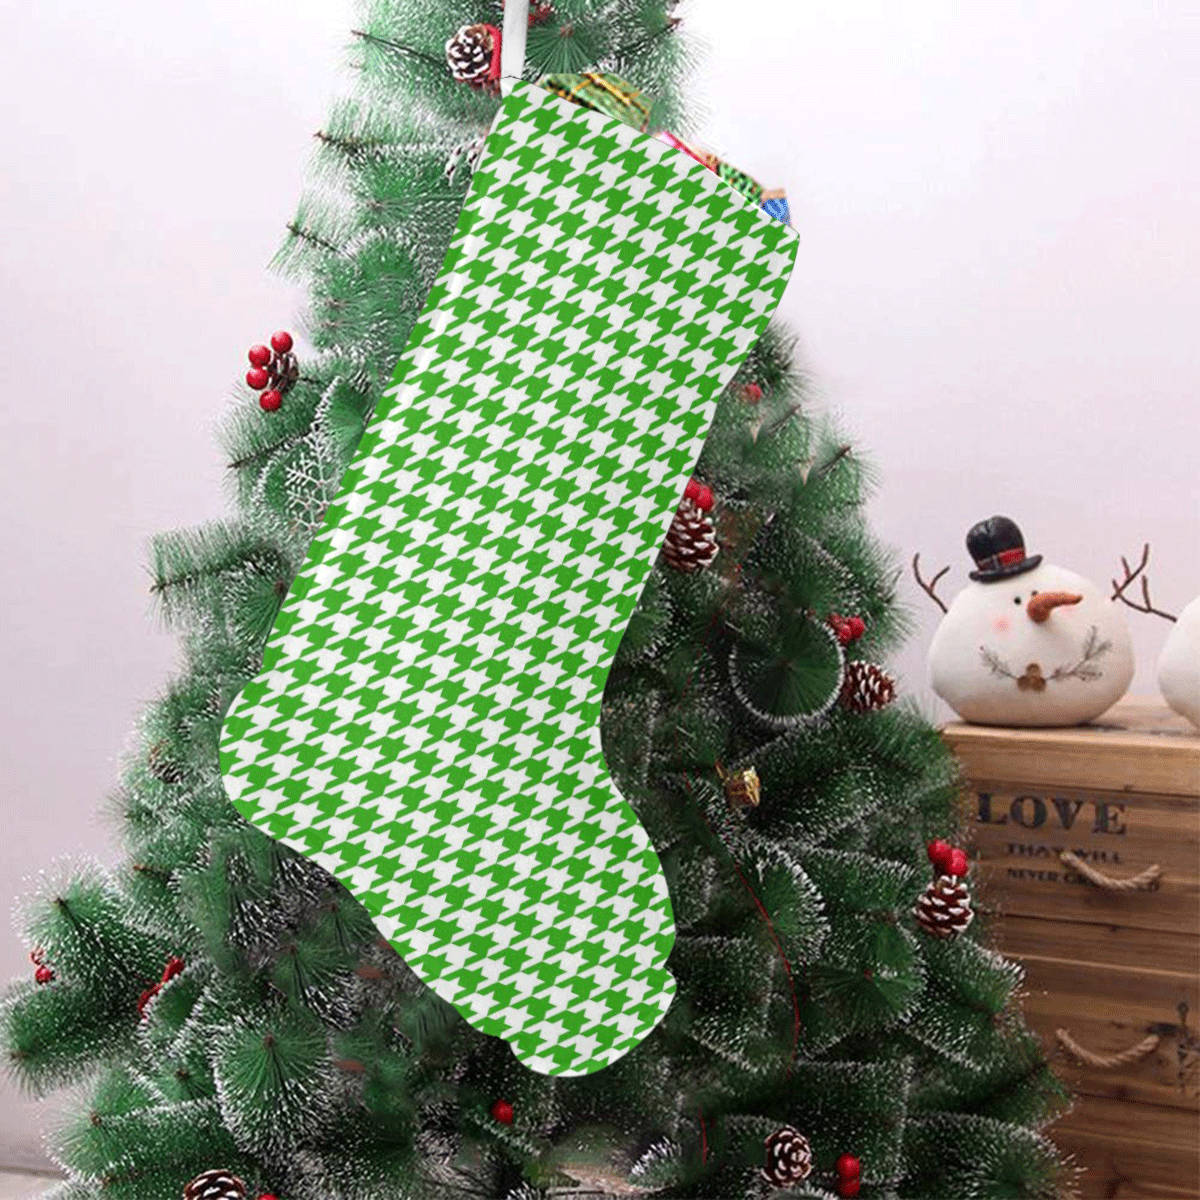 Friendly Houndstooth Pattern,green by FeelGood Christmas Stocking (Without Folded Top)